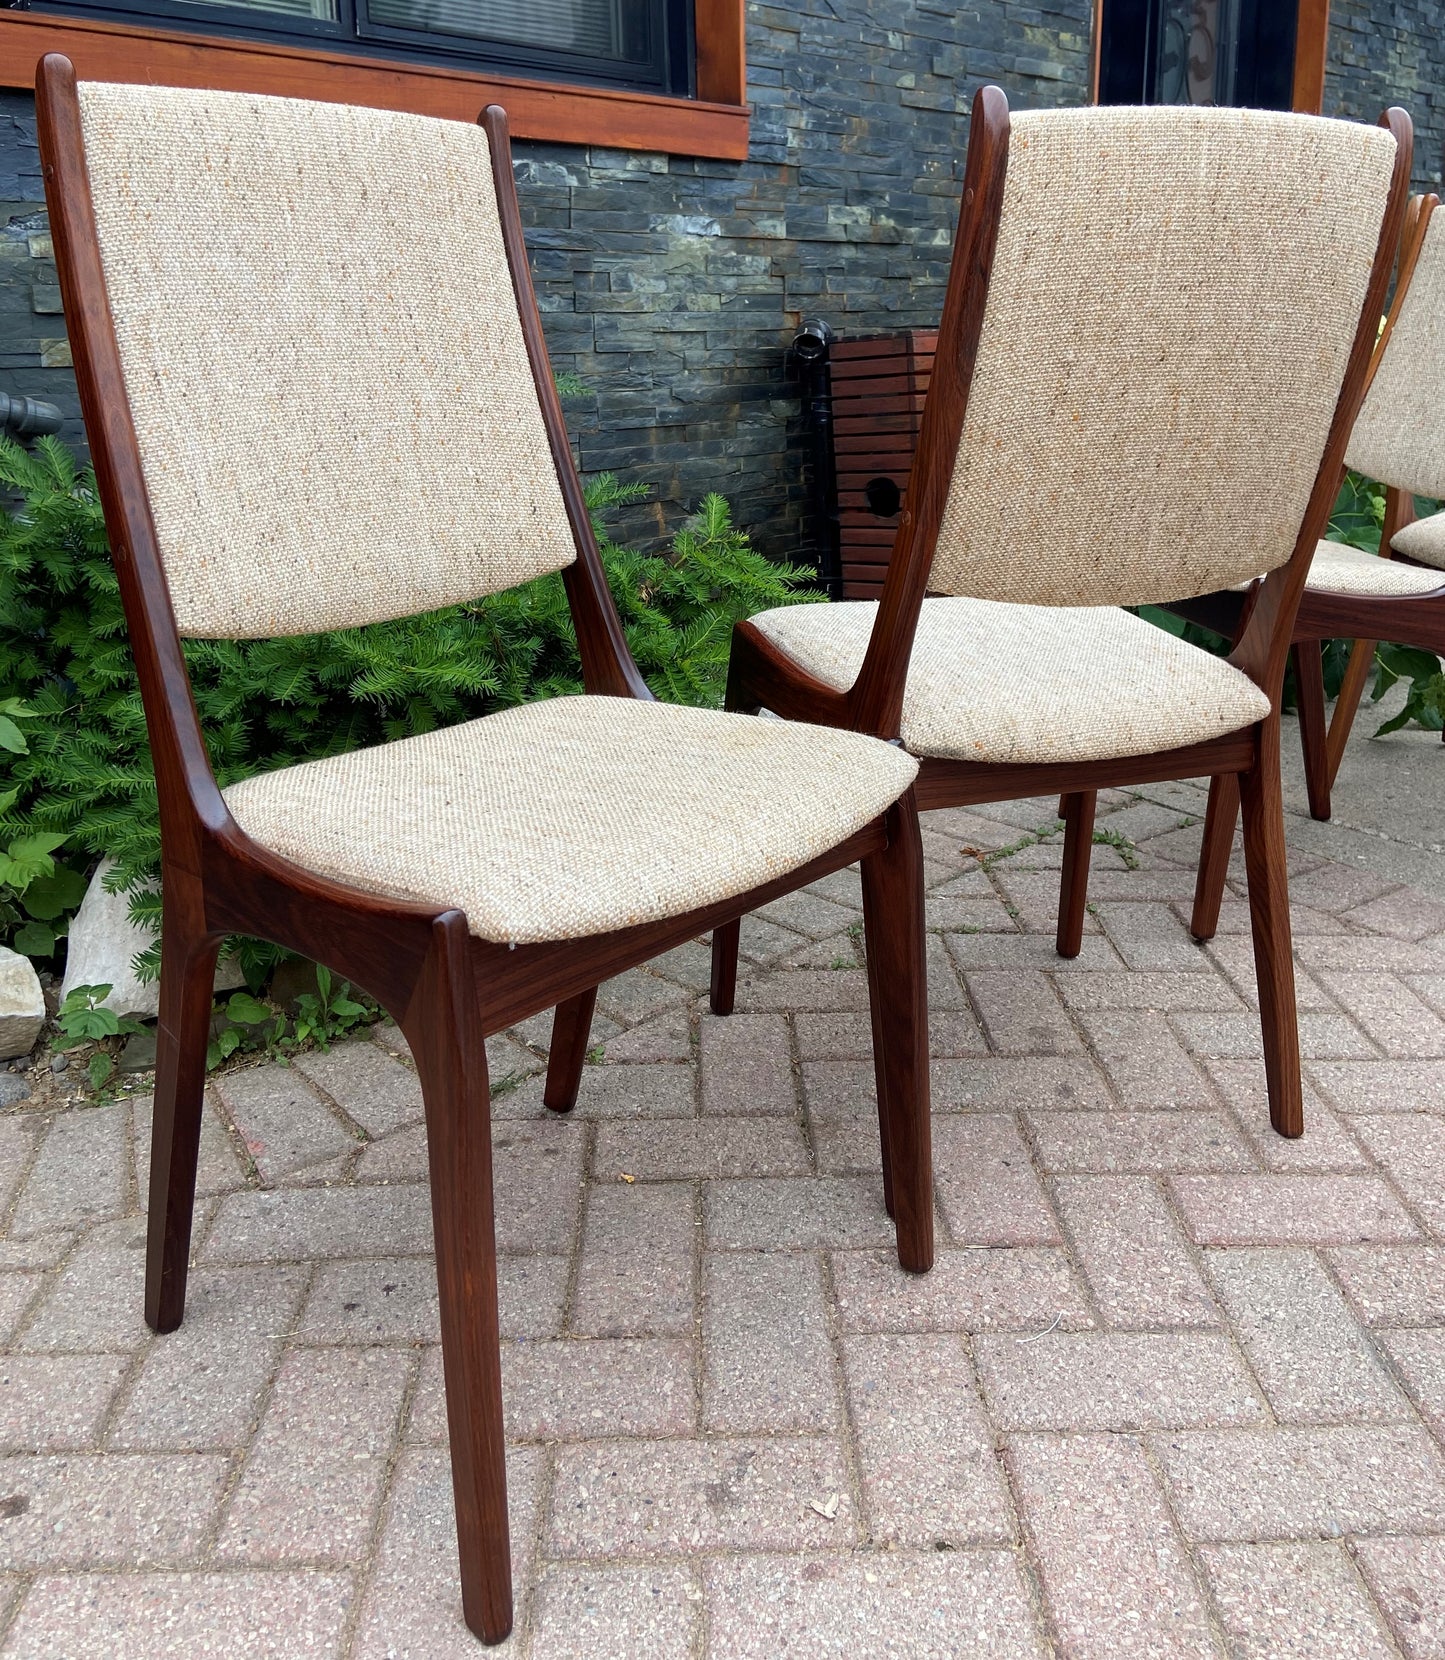 REFINISHED 8 Rosewood Danish Mid Century Modern Chairs by Kai Kristiansen, PERFECT